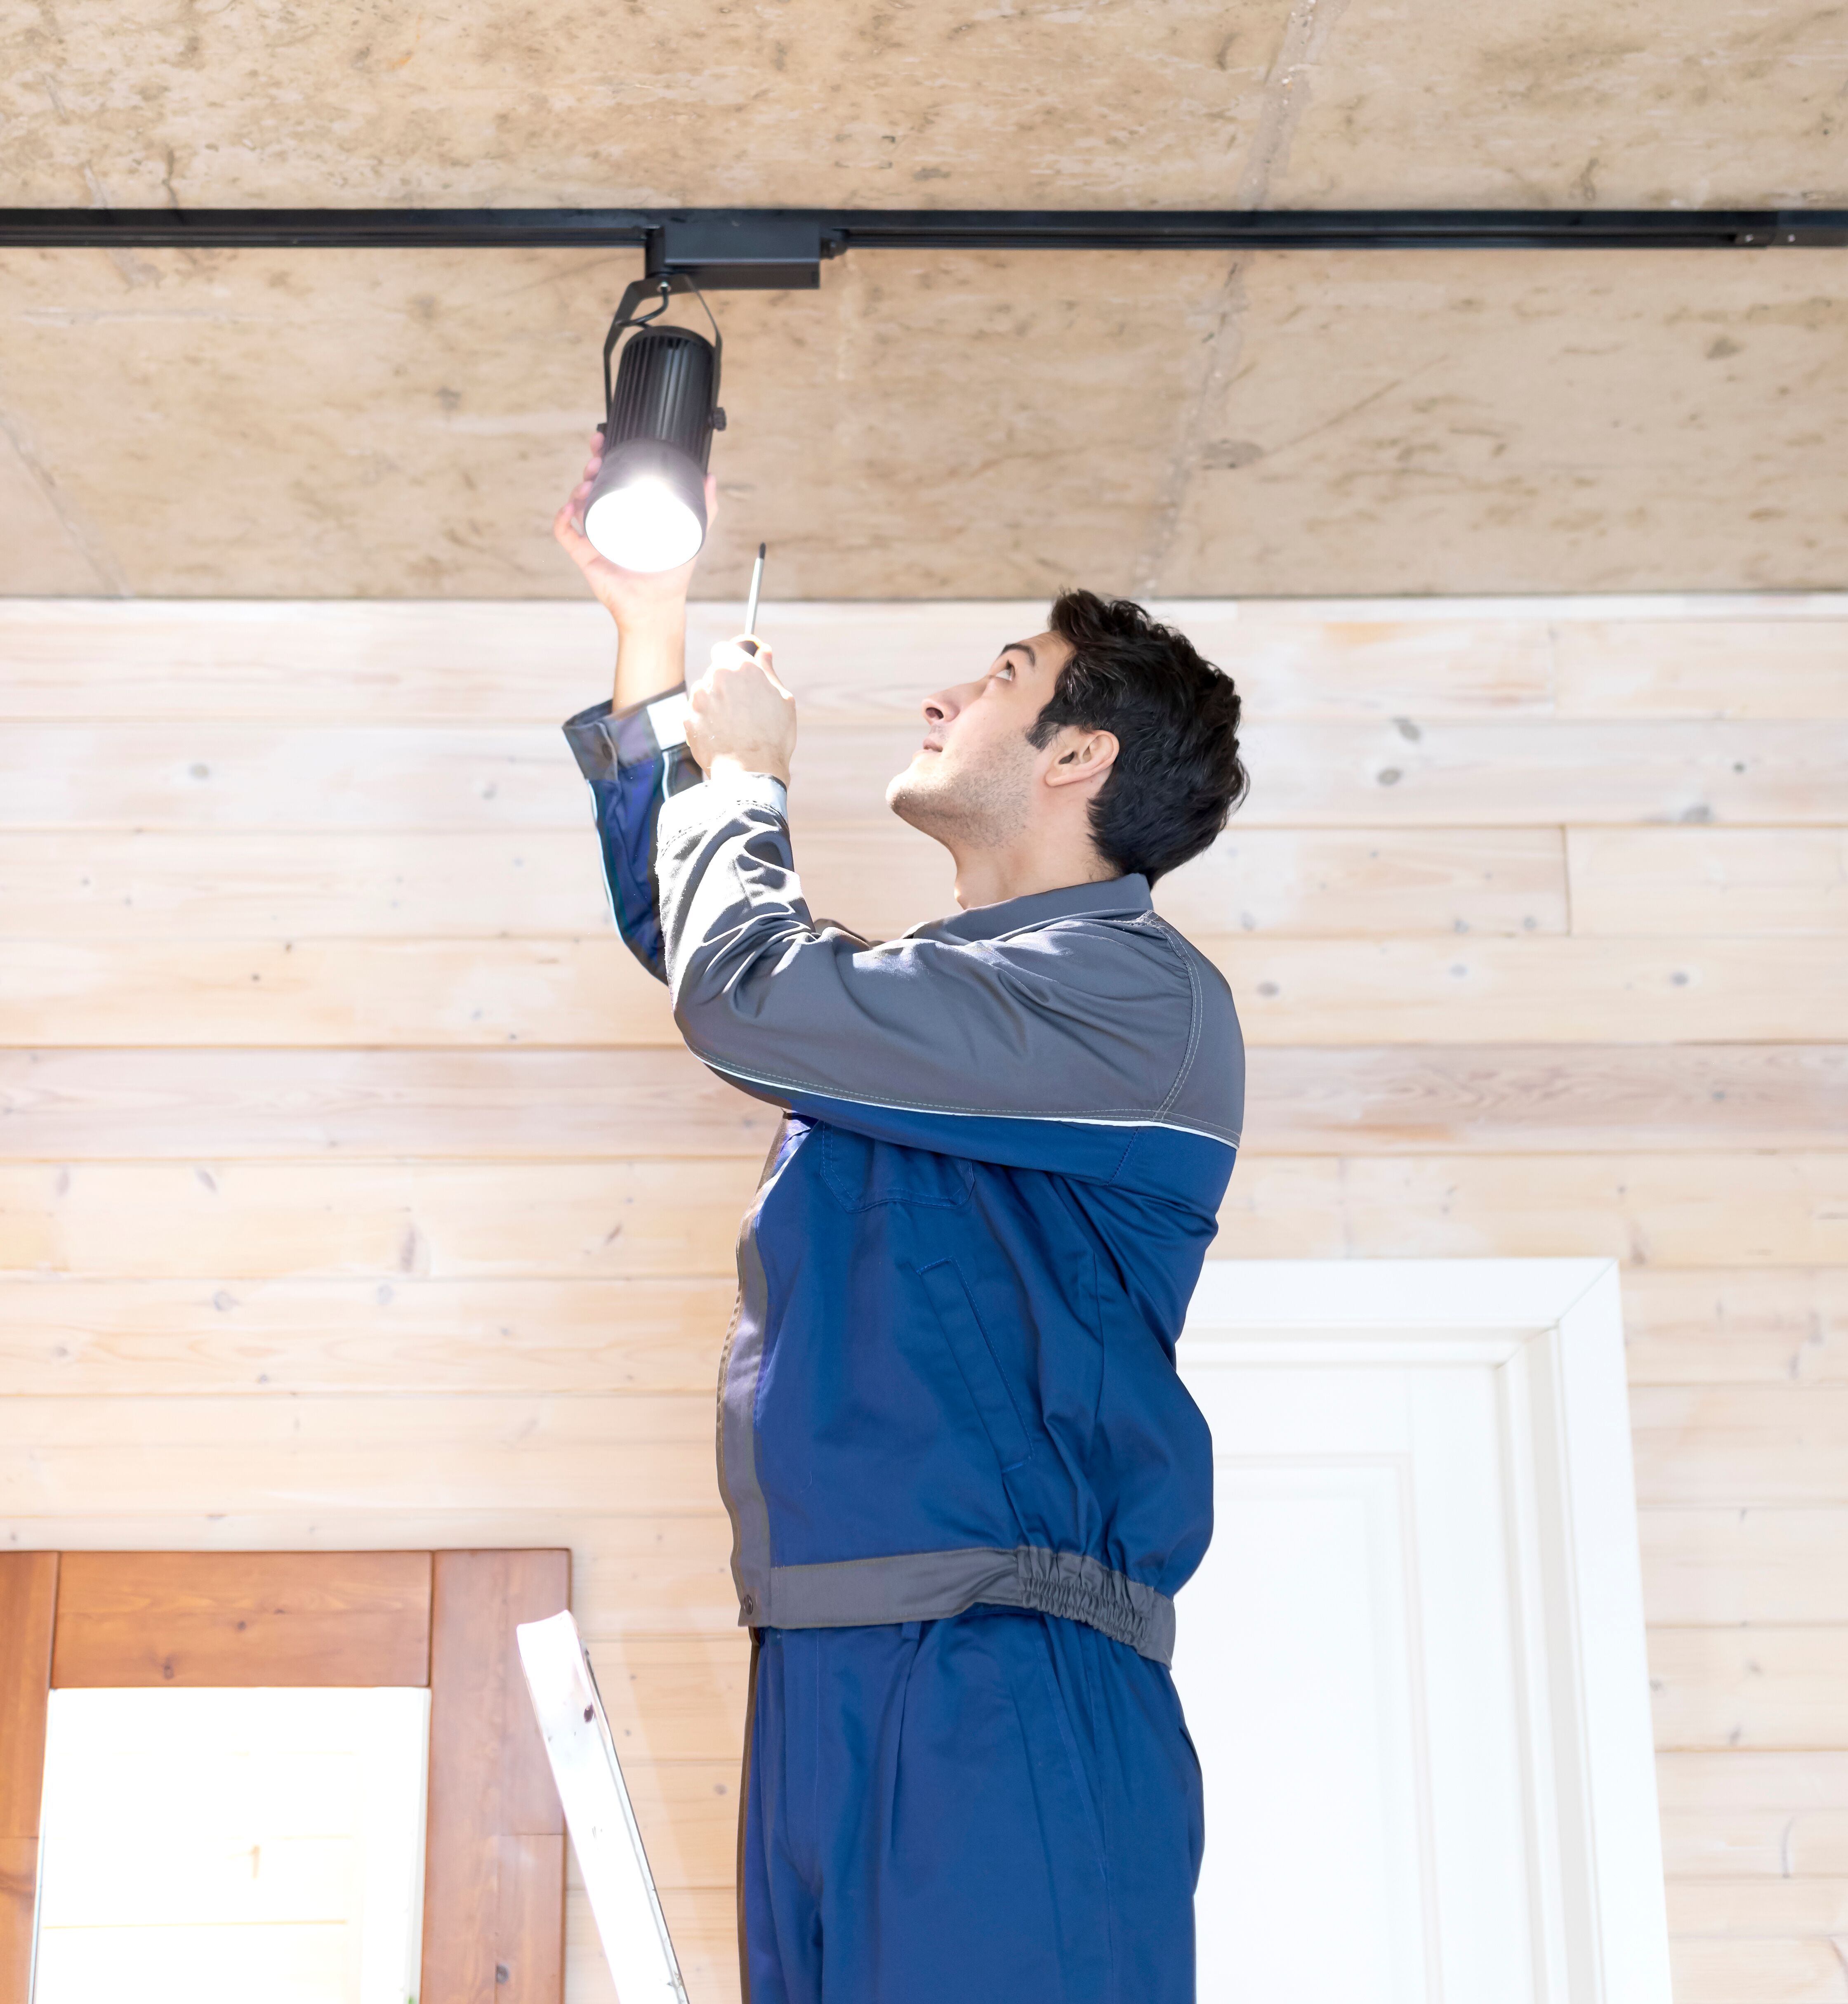 A Custom Electrical Services  home electrician in Utah handles a residential electrical project.